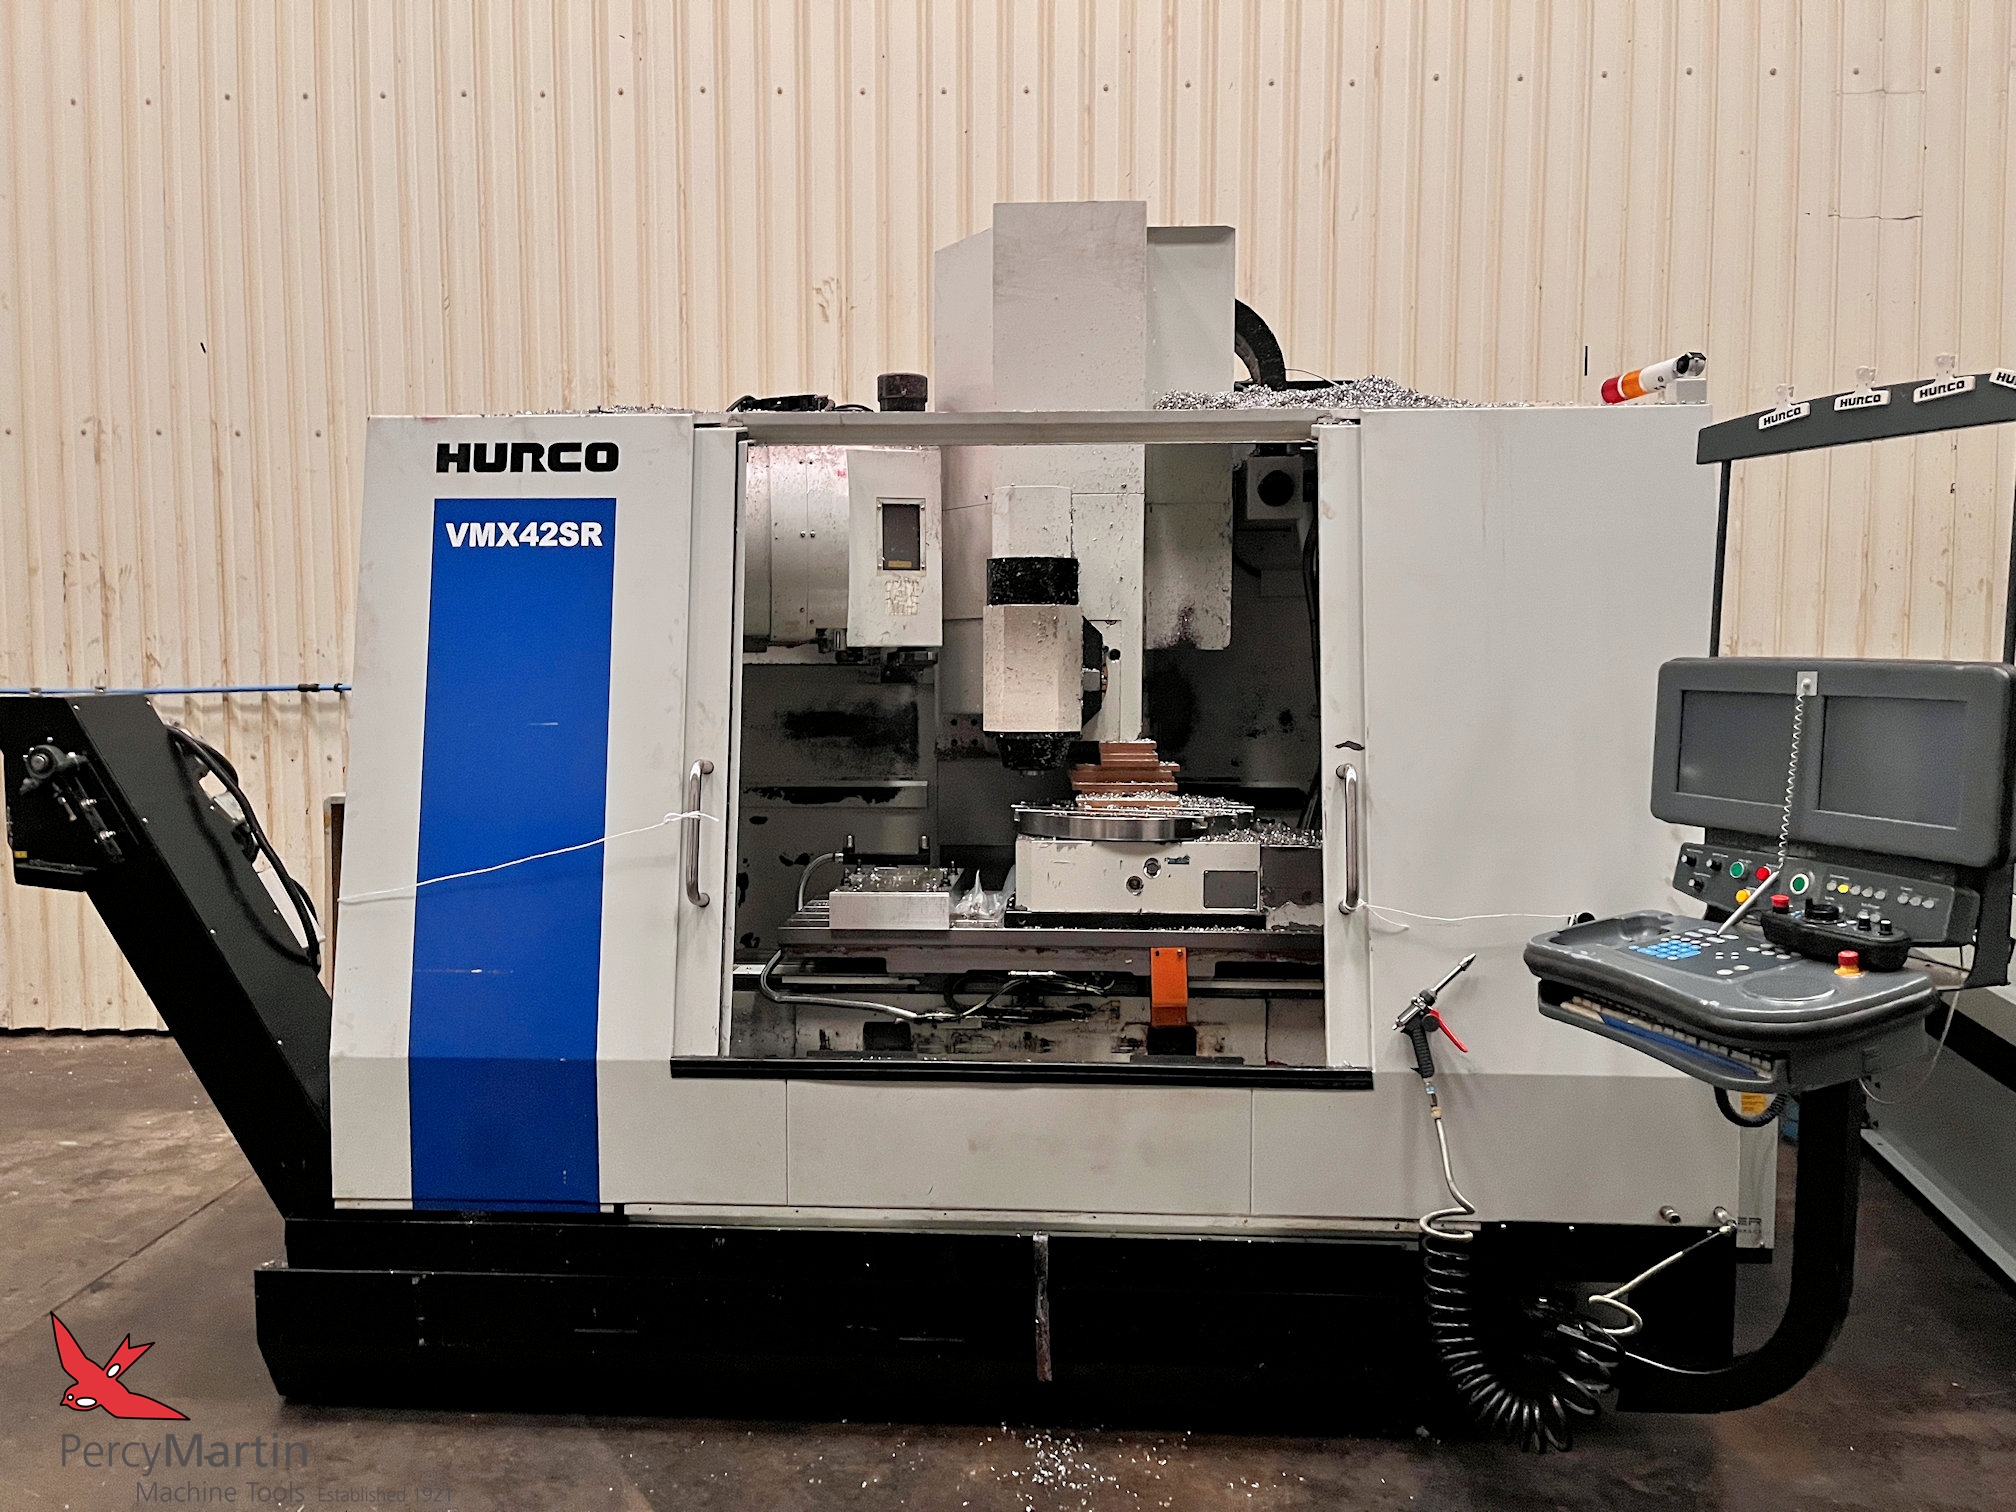 Used Hurco Vmx42sr 2011 5 Axis Machining Centres For Sale Percy Martin